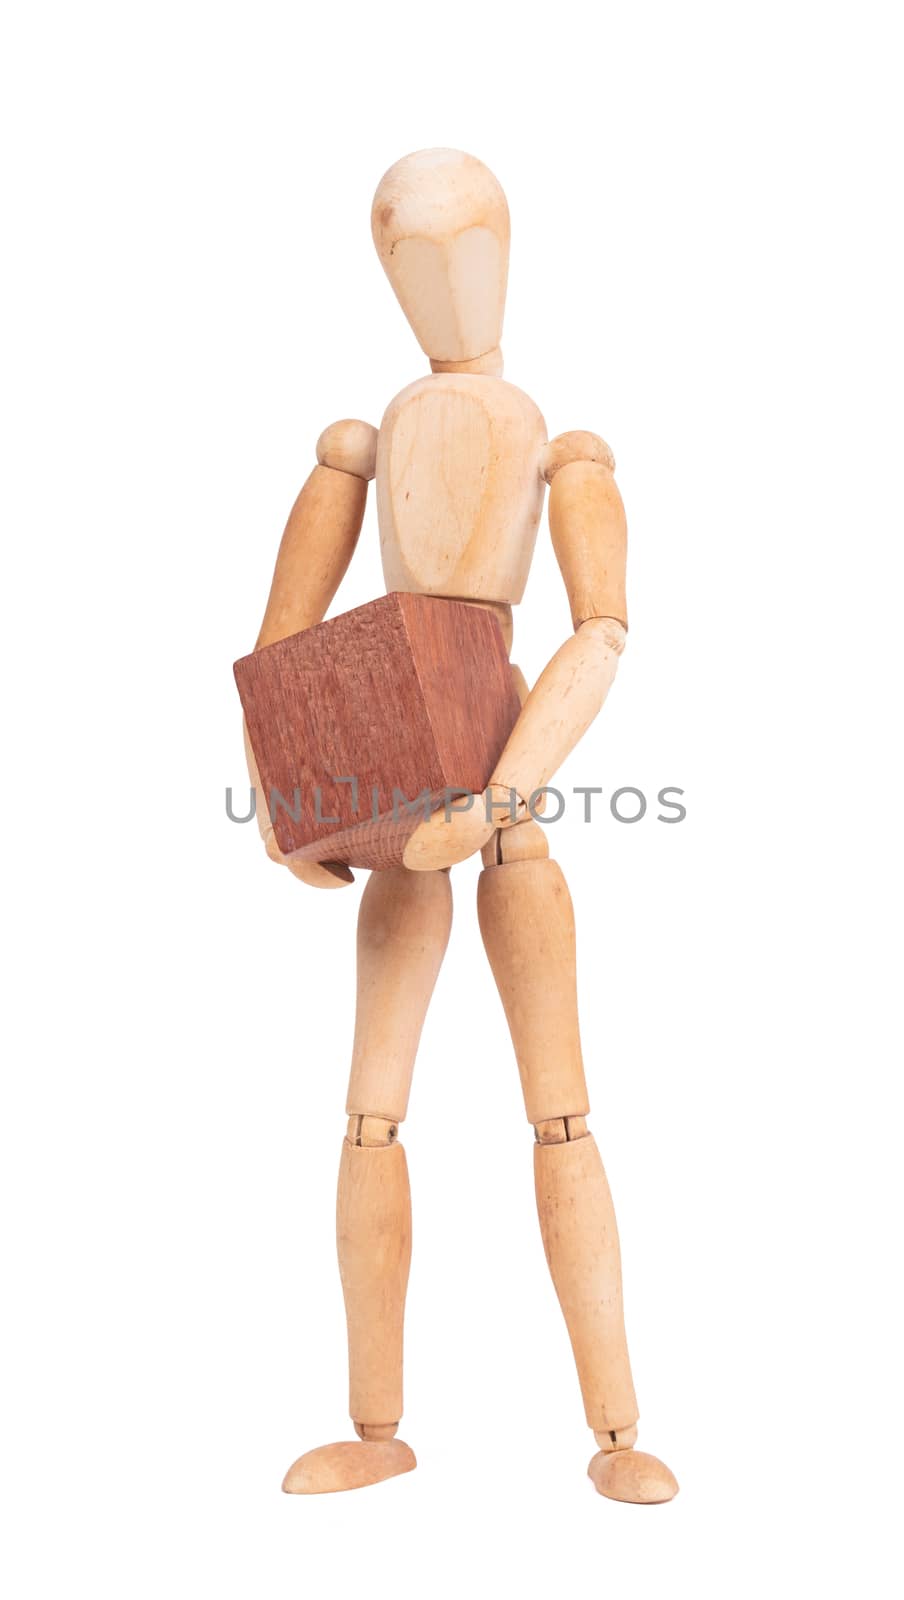 Wooden mannequin carrying a wooden hardwood block, isolated on white